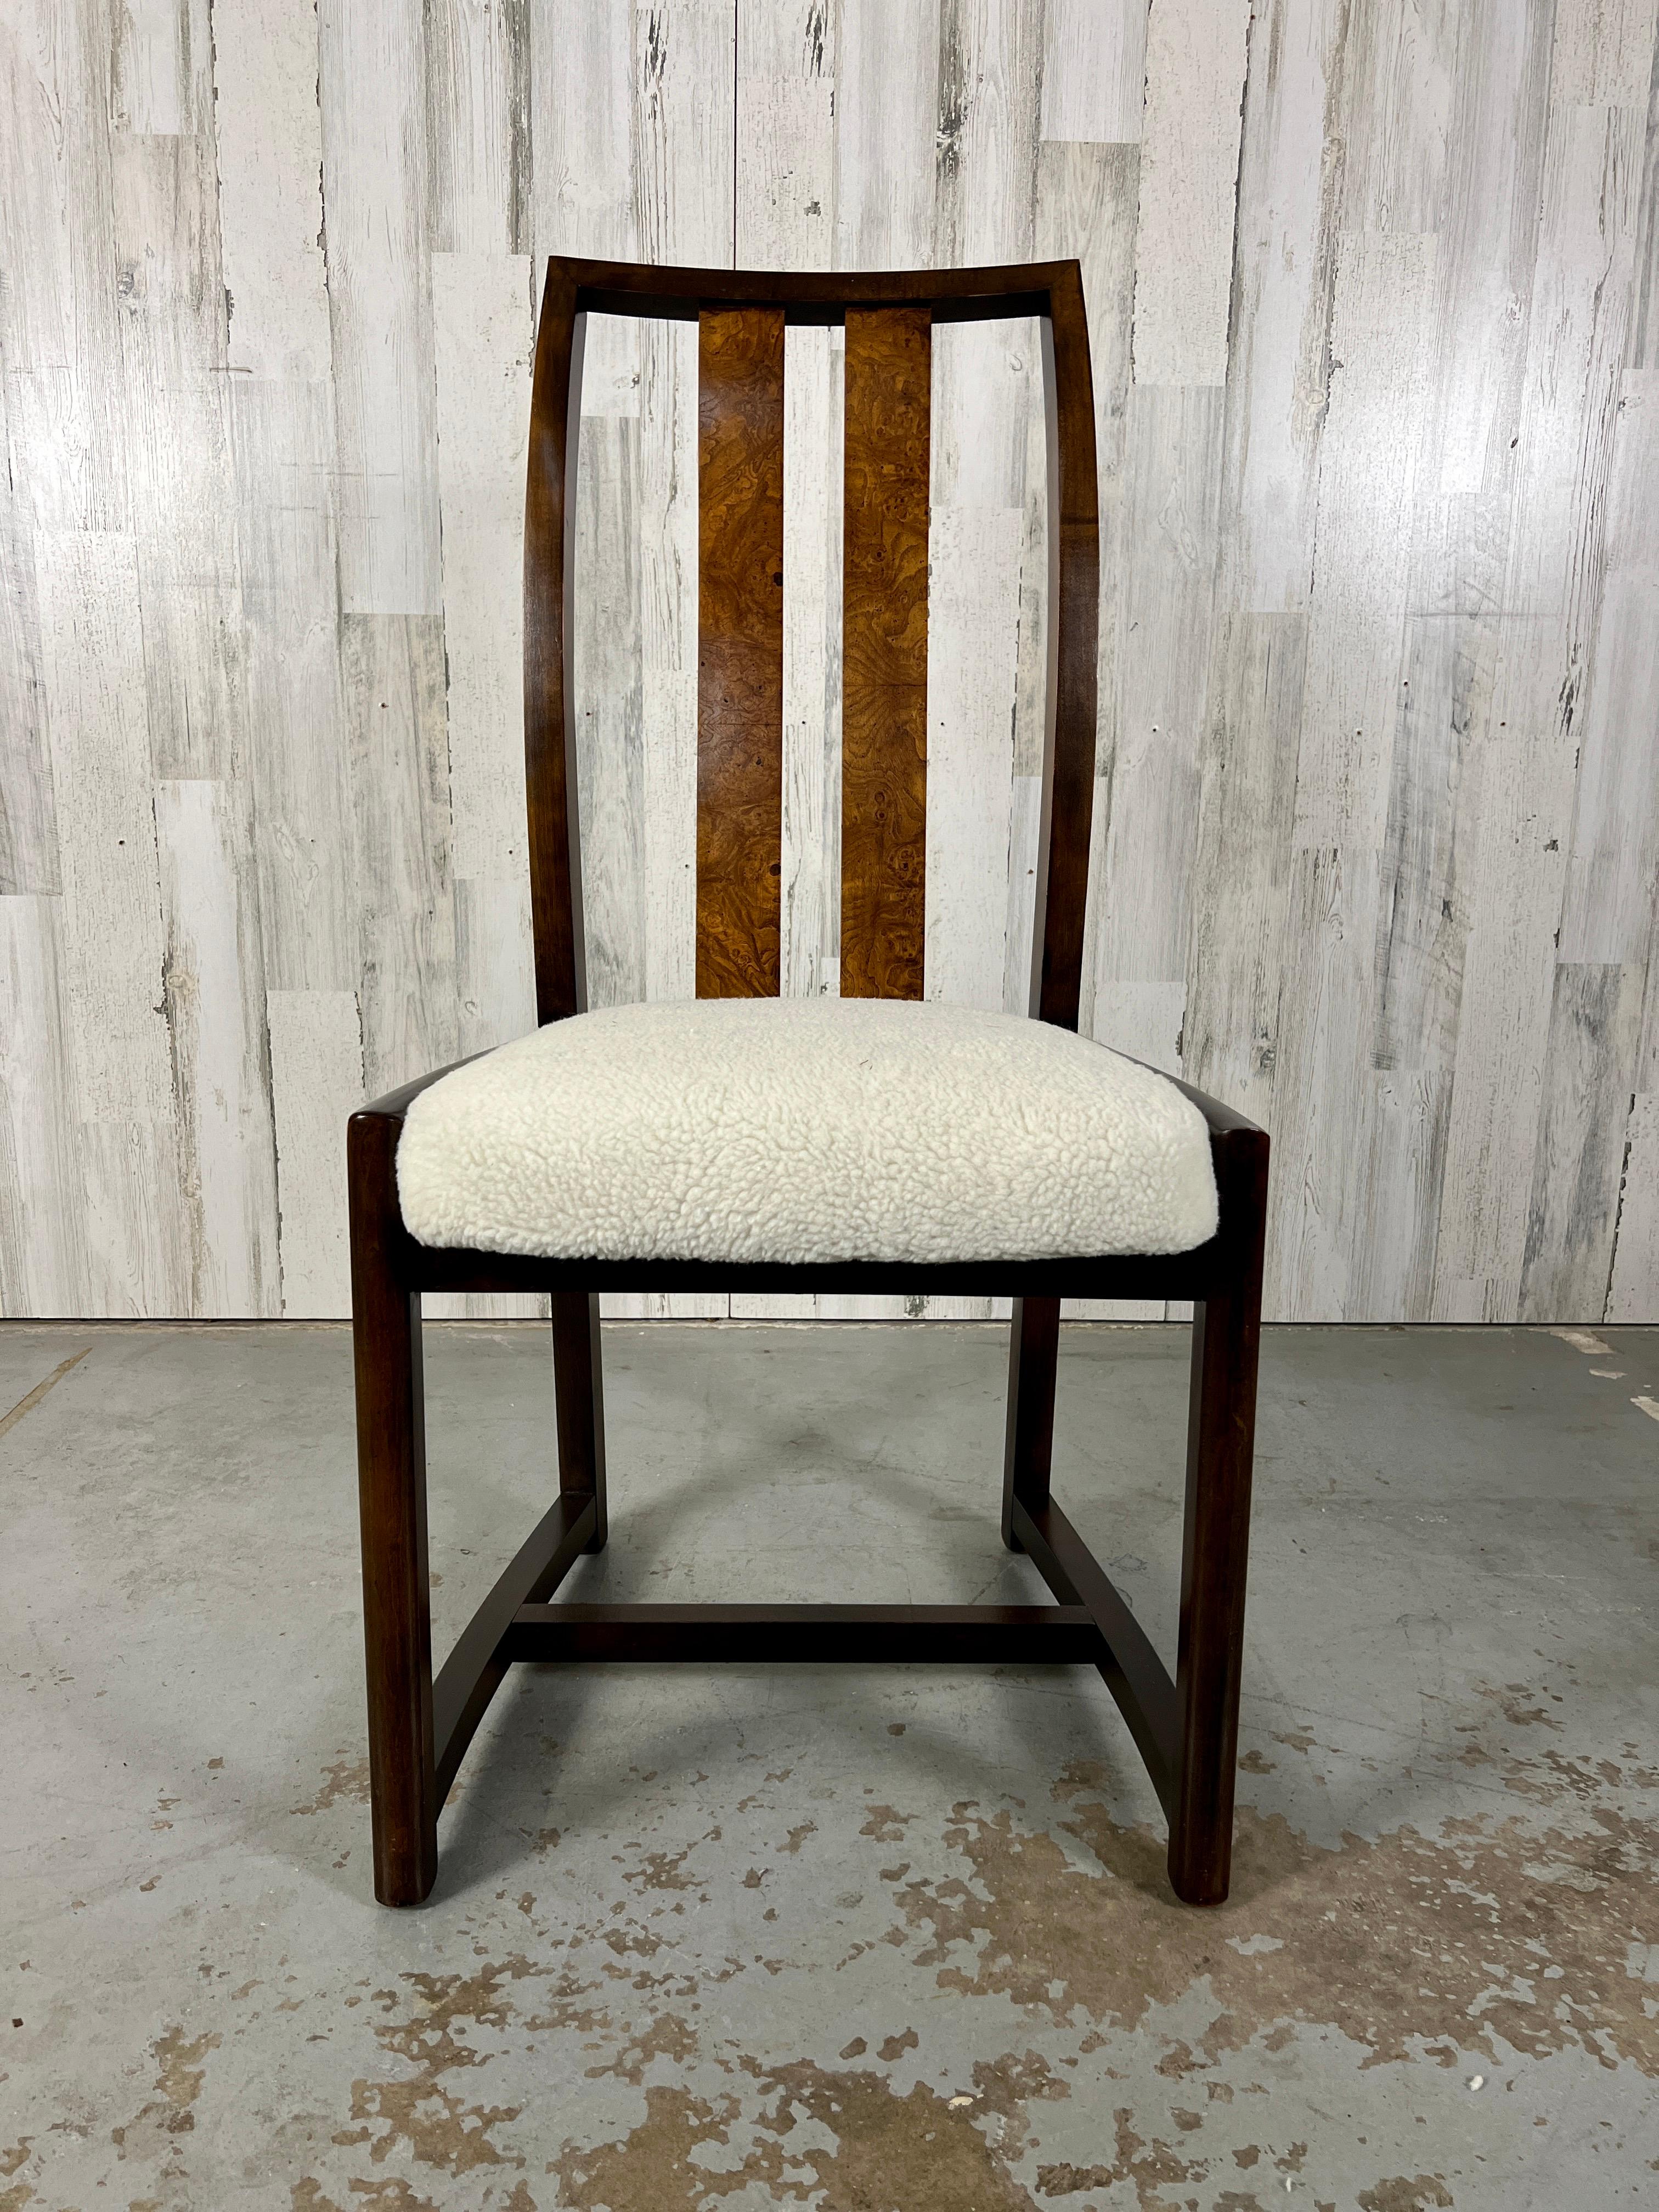 1980s Modernist Dining Chairs with Burl Wood Back Splat For Sale 3